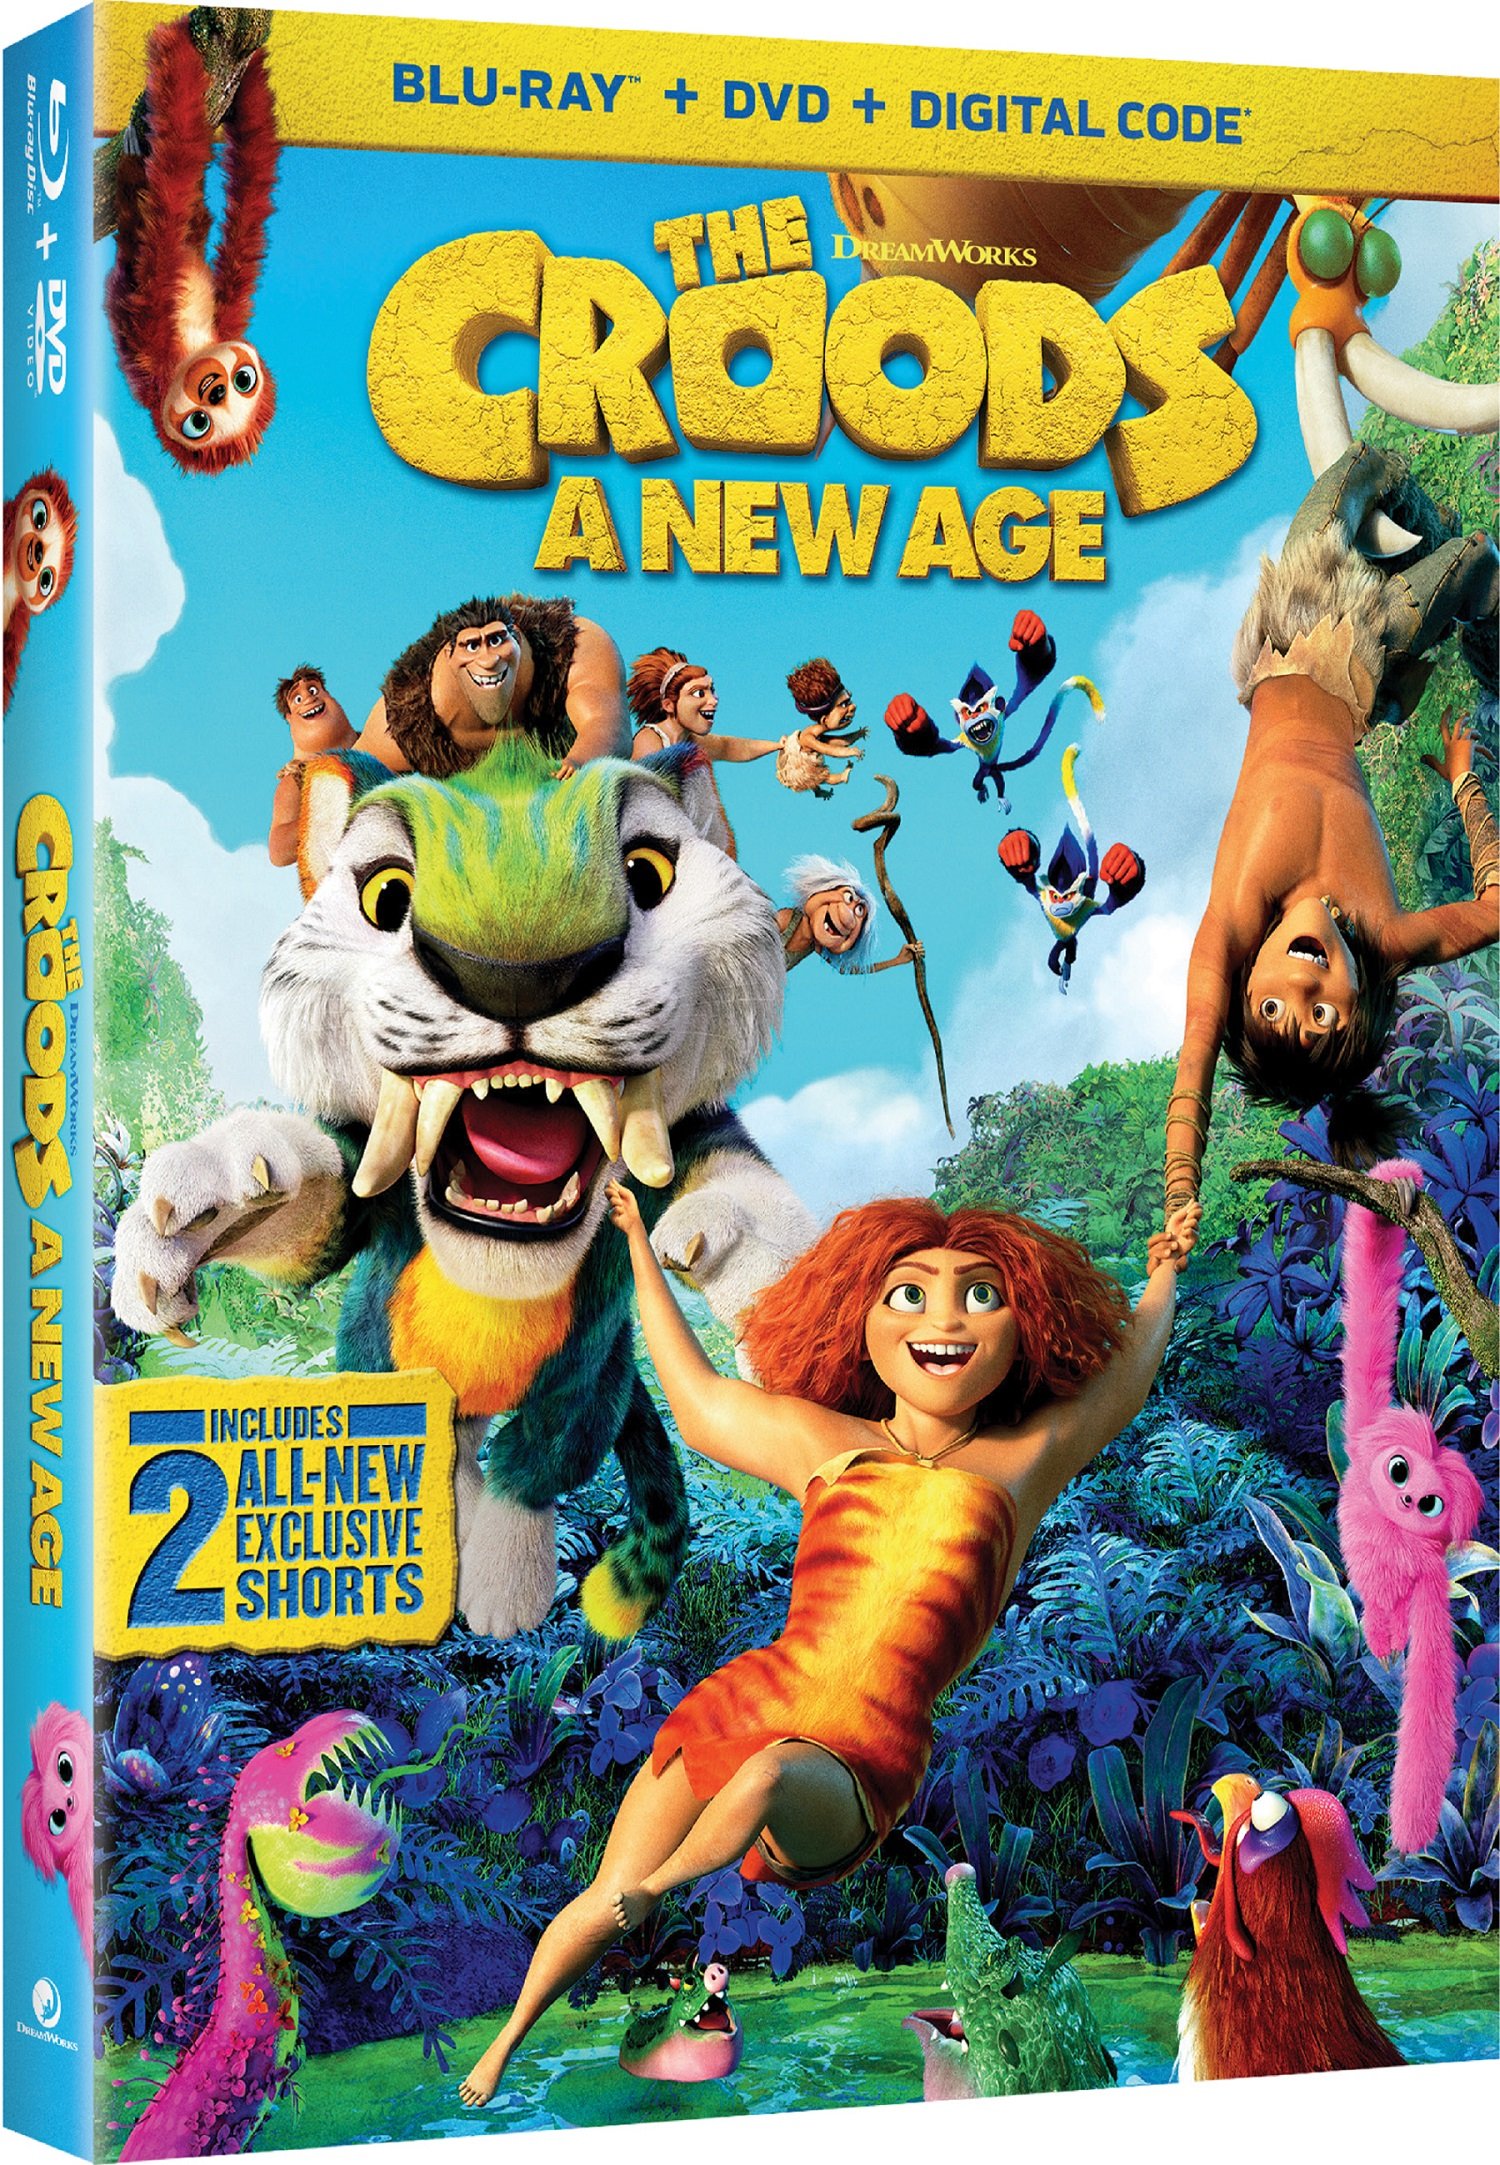 The Croods: A New Age Blu-ray